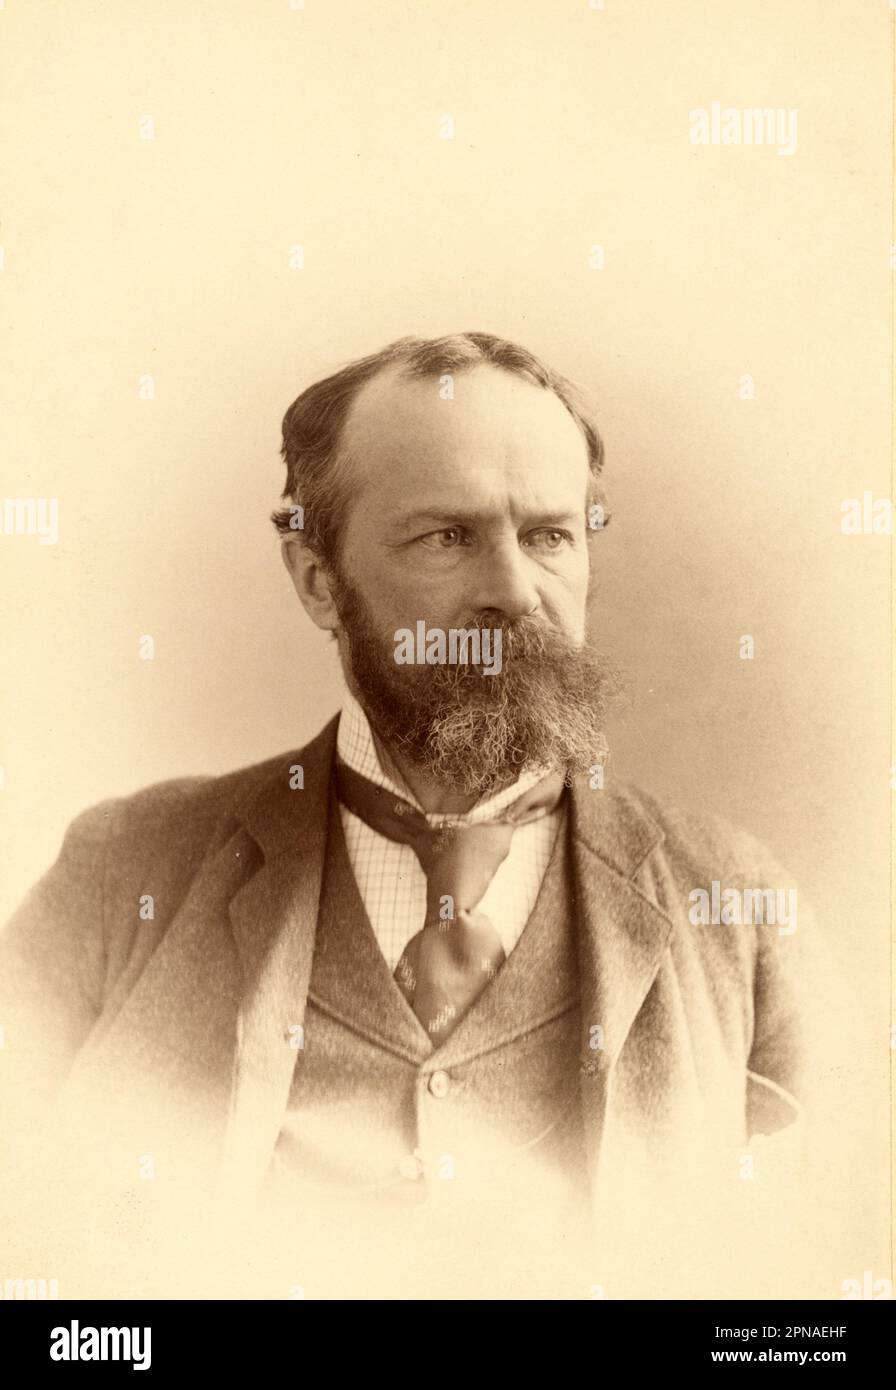 Vintage portrait of the American philosopher and psychologist, William James (1842-1910) by Pach Brothers Studio, c.1880 Stock Photo